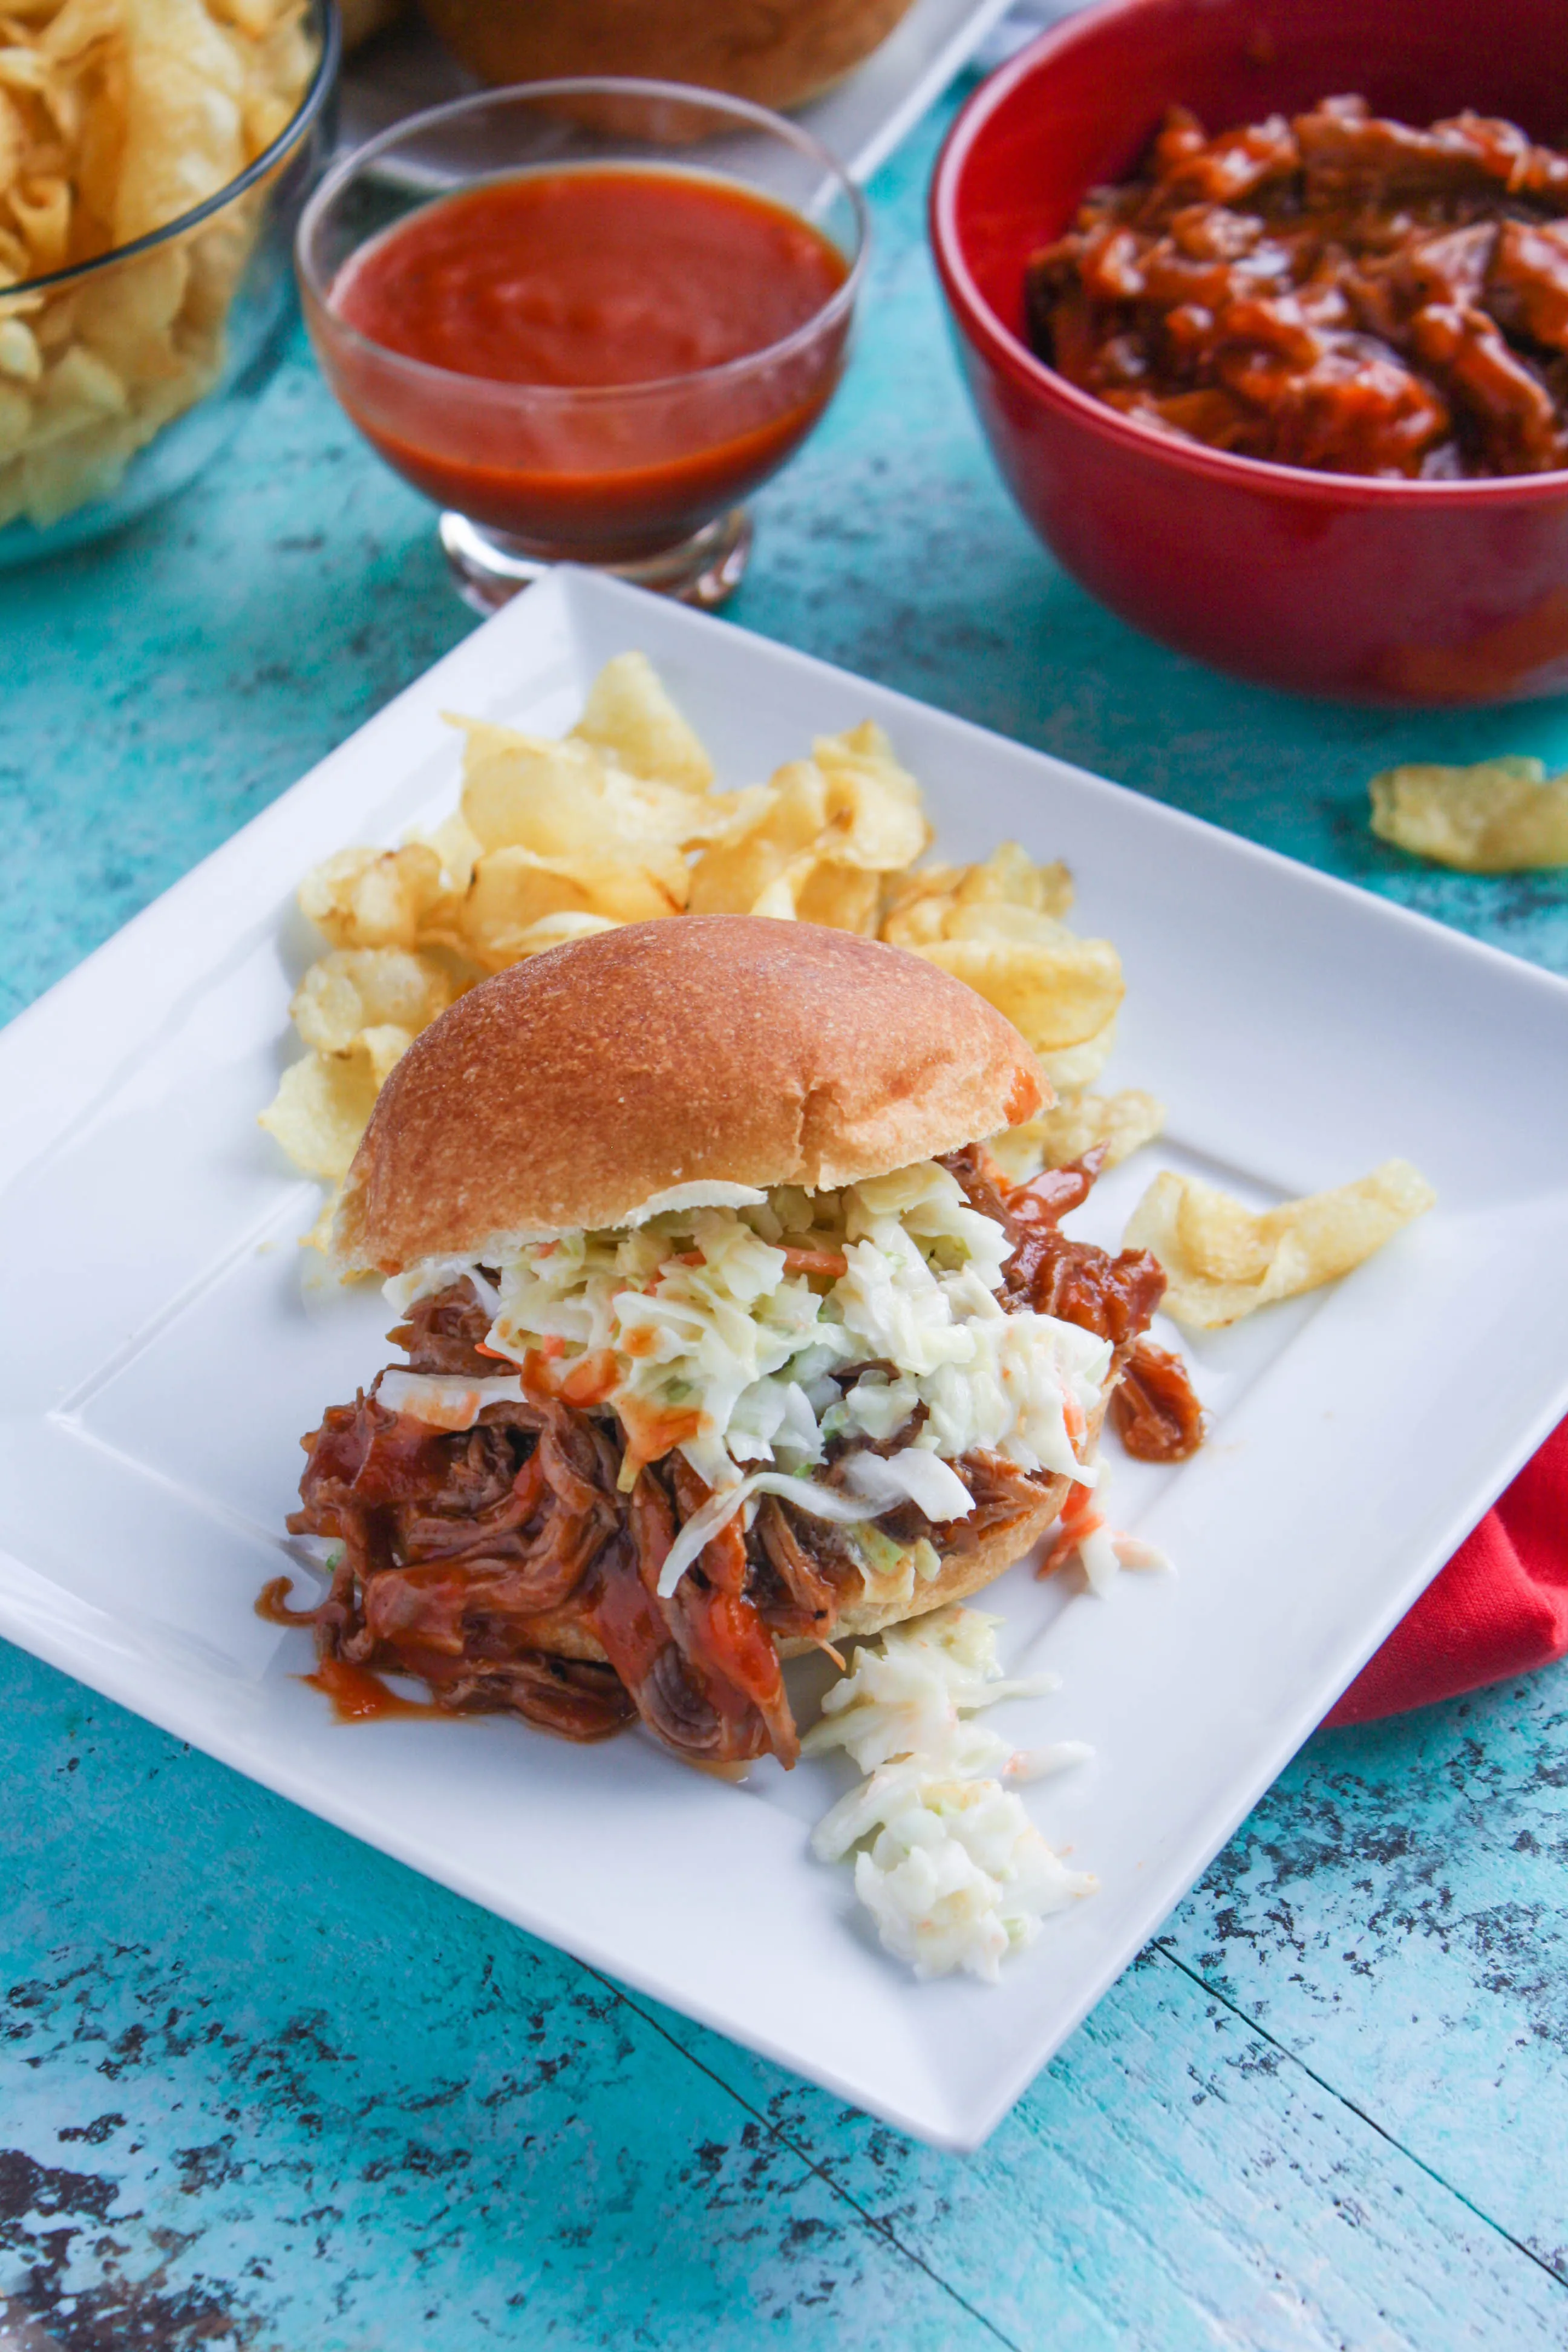 Slow Cooker BBQ Beef Sandwiches are great to serve to a group gathered for any occasion. Everyone will love these sandwiches, and the slow cooker makes them so easy to make!